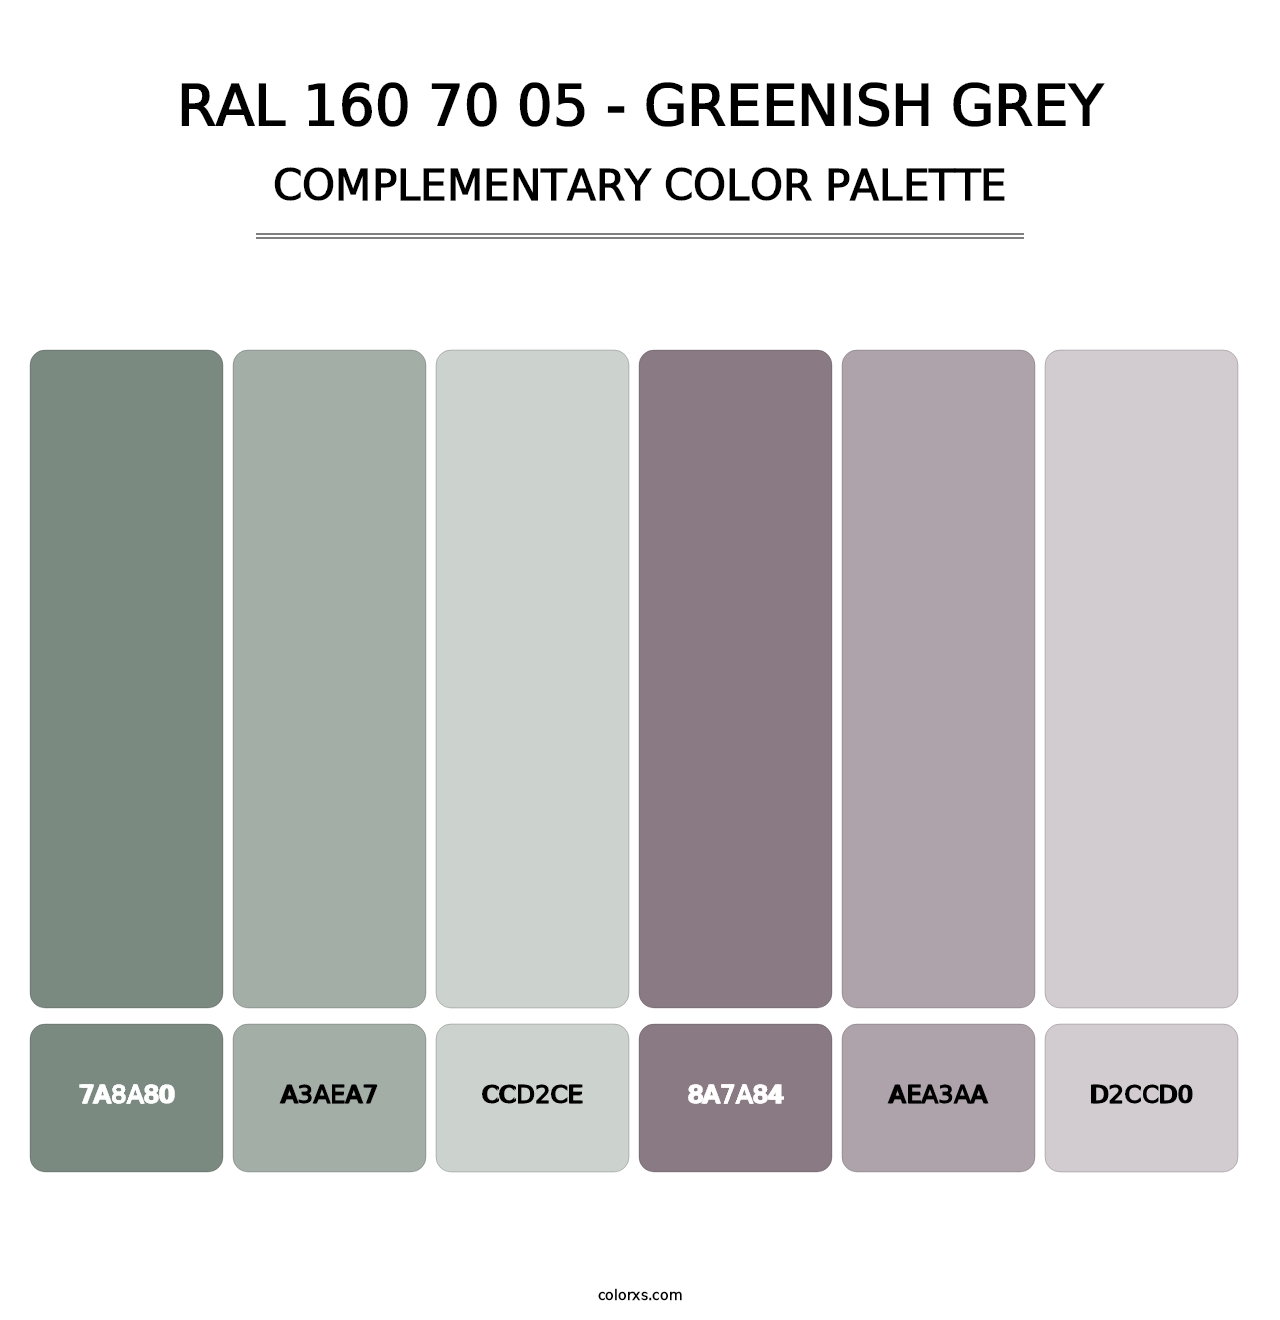 RAL 160 70 05 - Greenish Grey - Complementary Color Palette